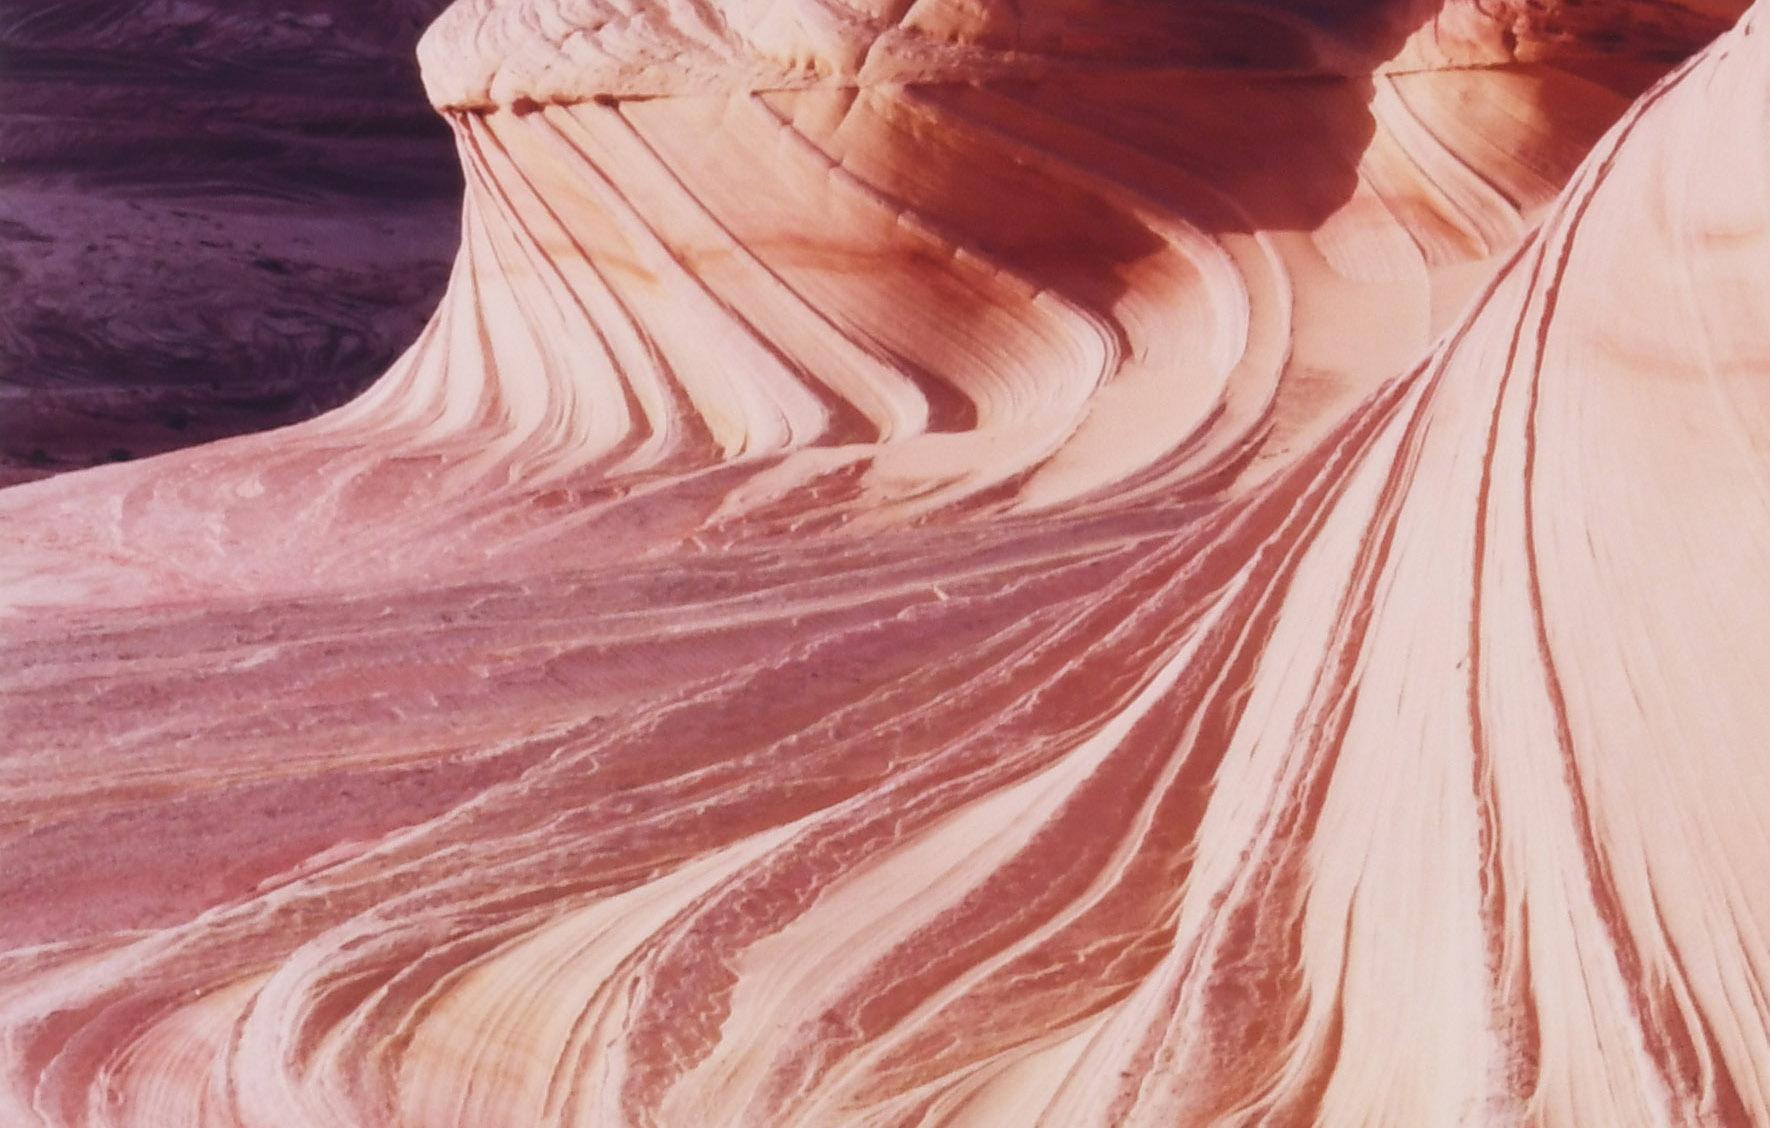 The Second Wave, Coyote Buttes, Paria Canyon-Vermilion Clifts Wilderness, Arizona
Photograph on Kodak Professional Paper, c. 1980's
Unsigned
Condition: Excellent
                  Minor handling issues
Image/Sheet size: 20 x 16 inches
The photo